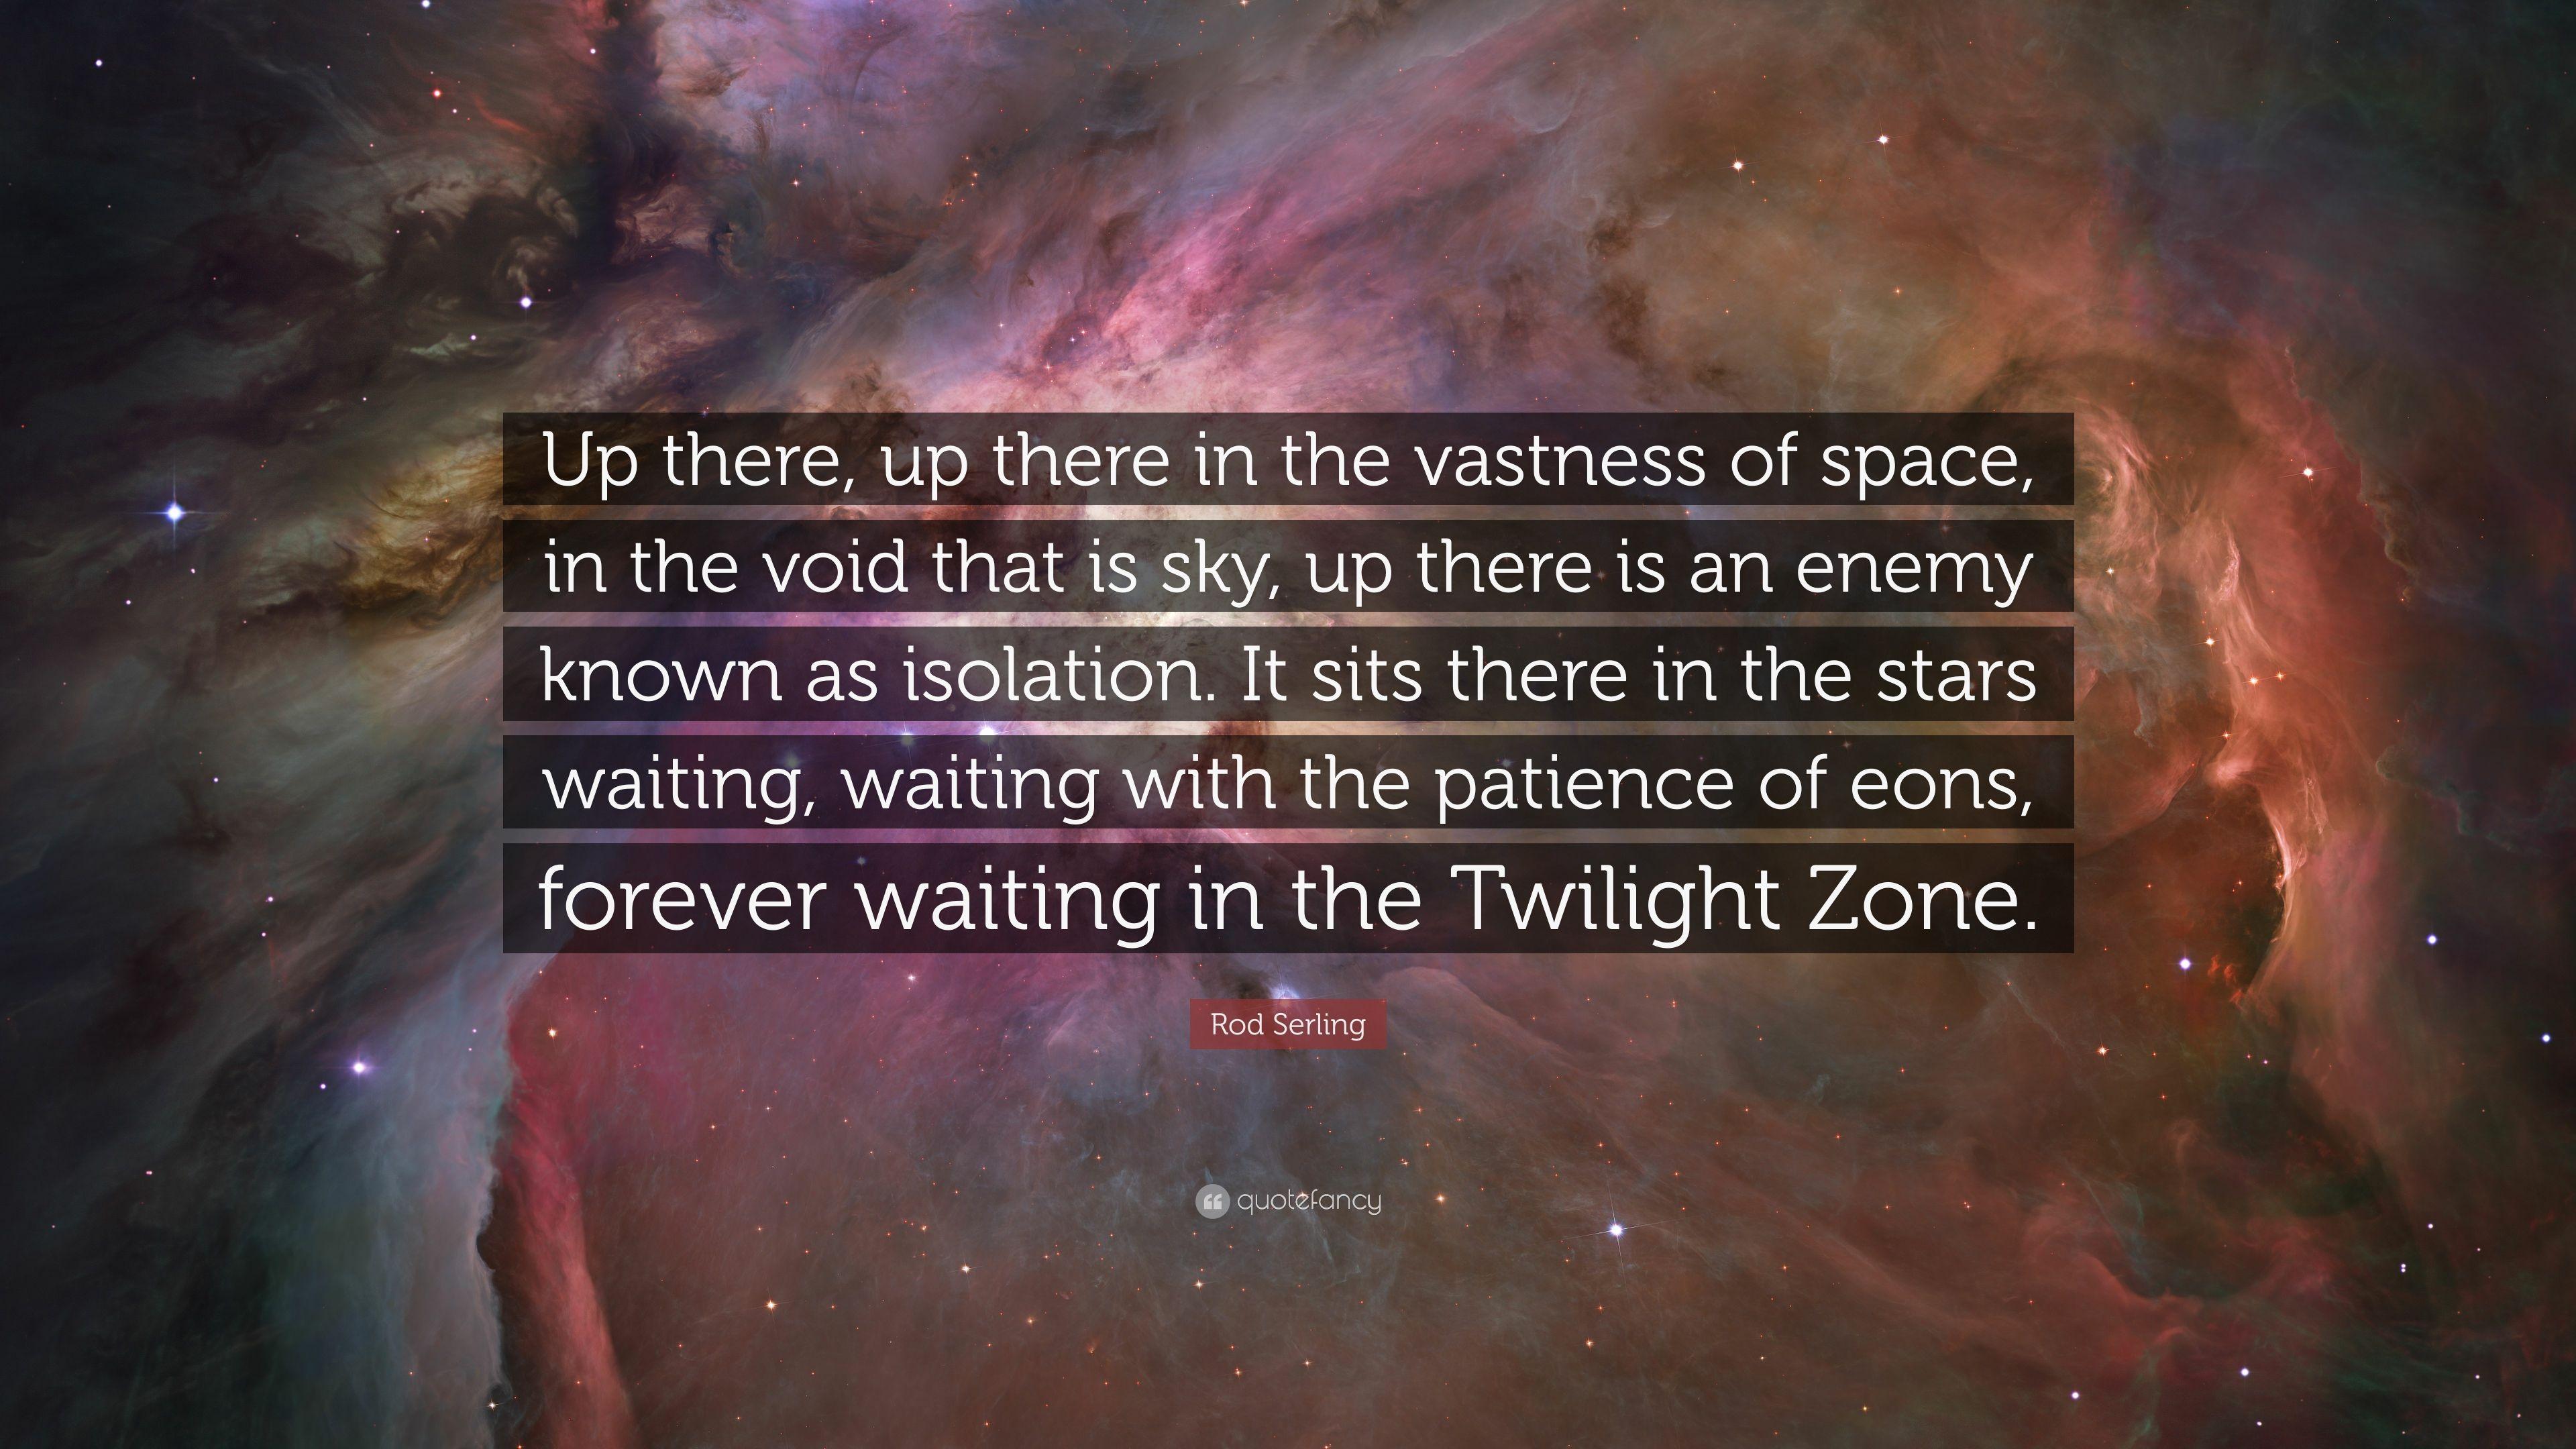 Rod Serling Quote: “Up there, up there in the vastness of space